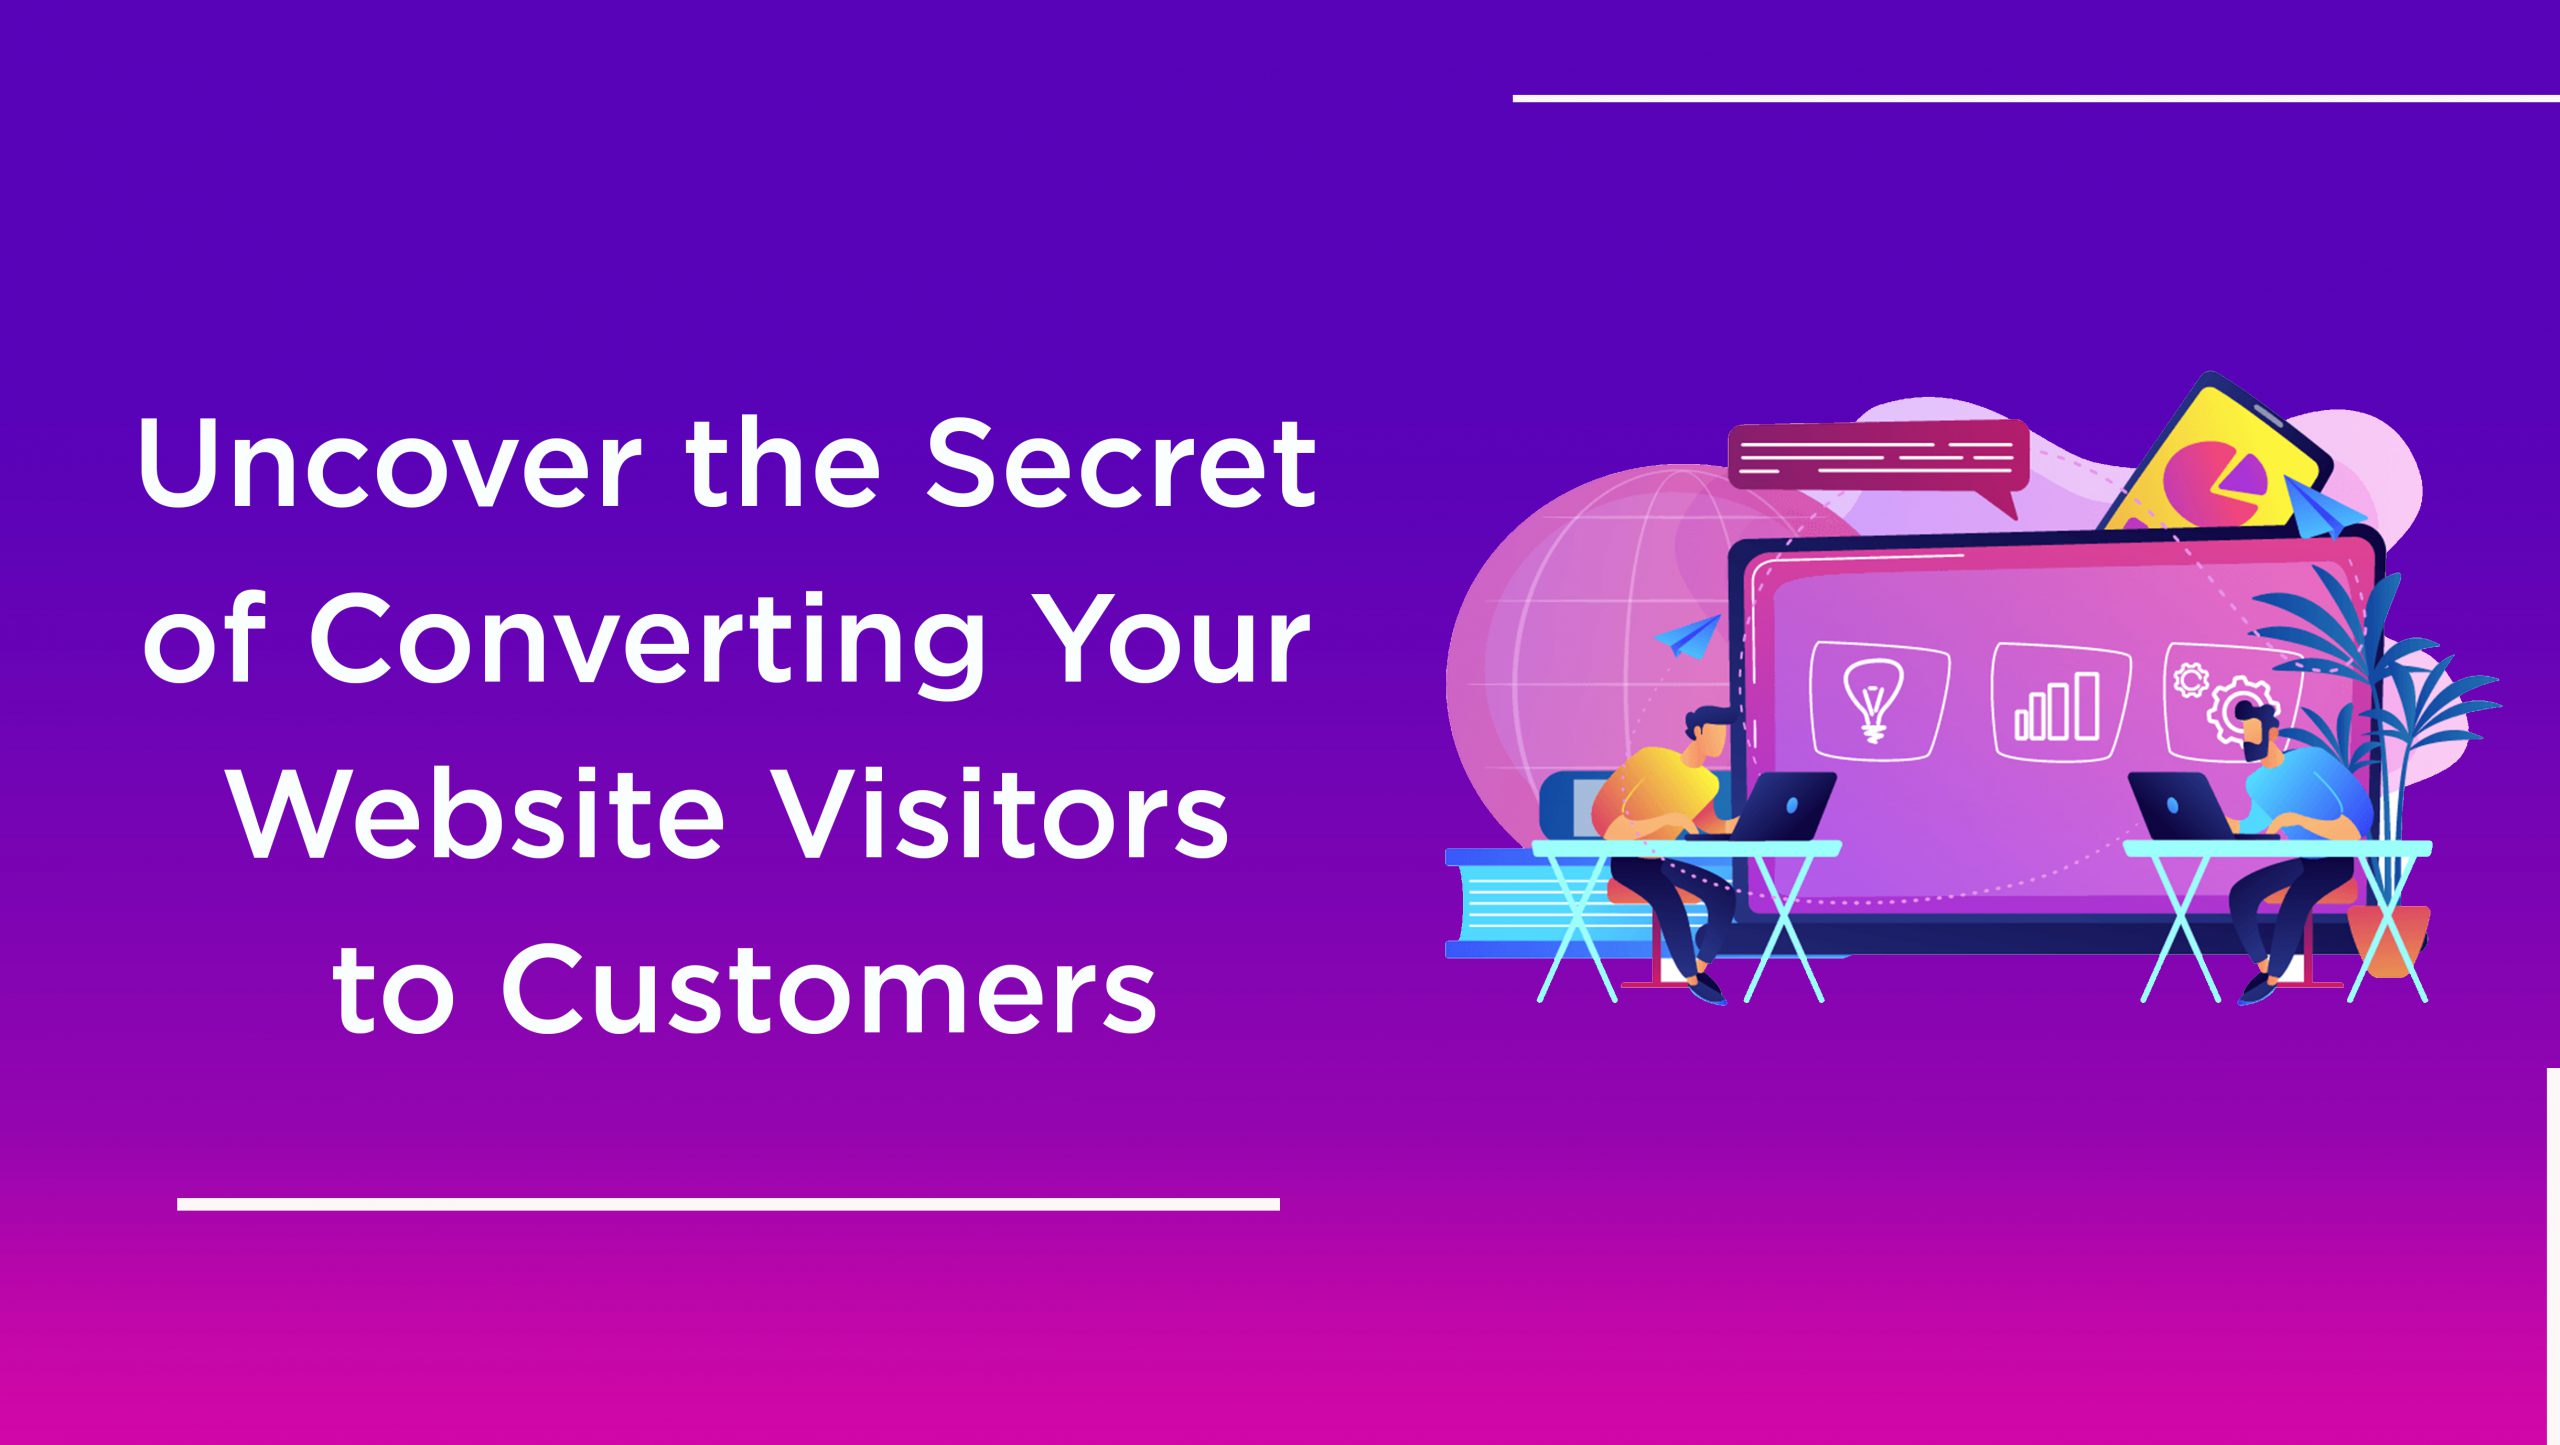 Uncover The Secret of Converting Your Website Visitors to Customers